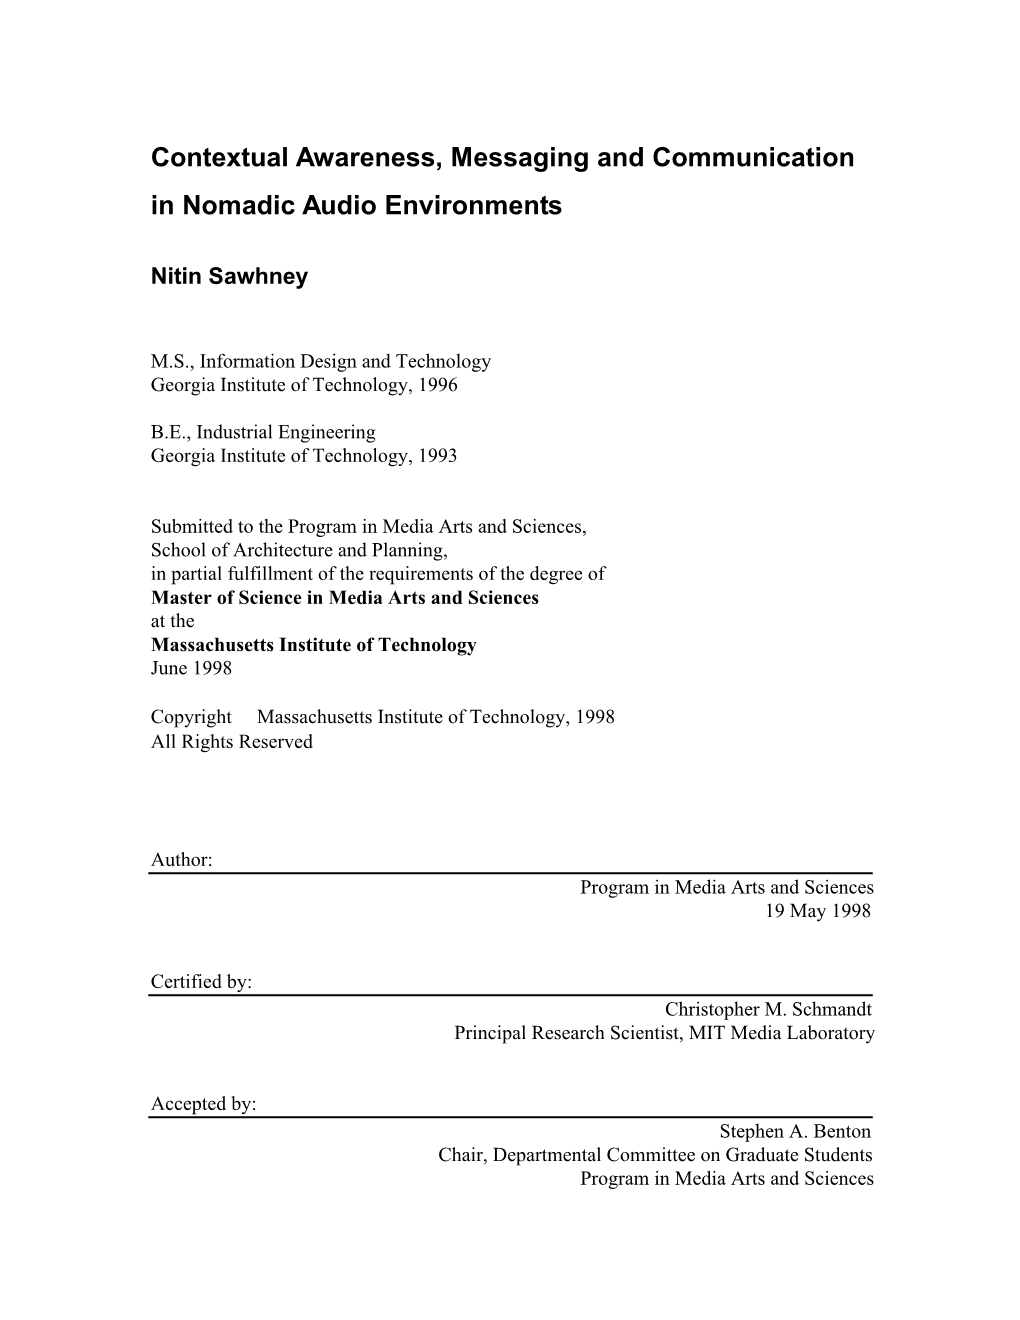 Contextual Awareness, Messaging and Communication in Nomadic Audio Environments